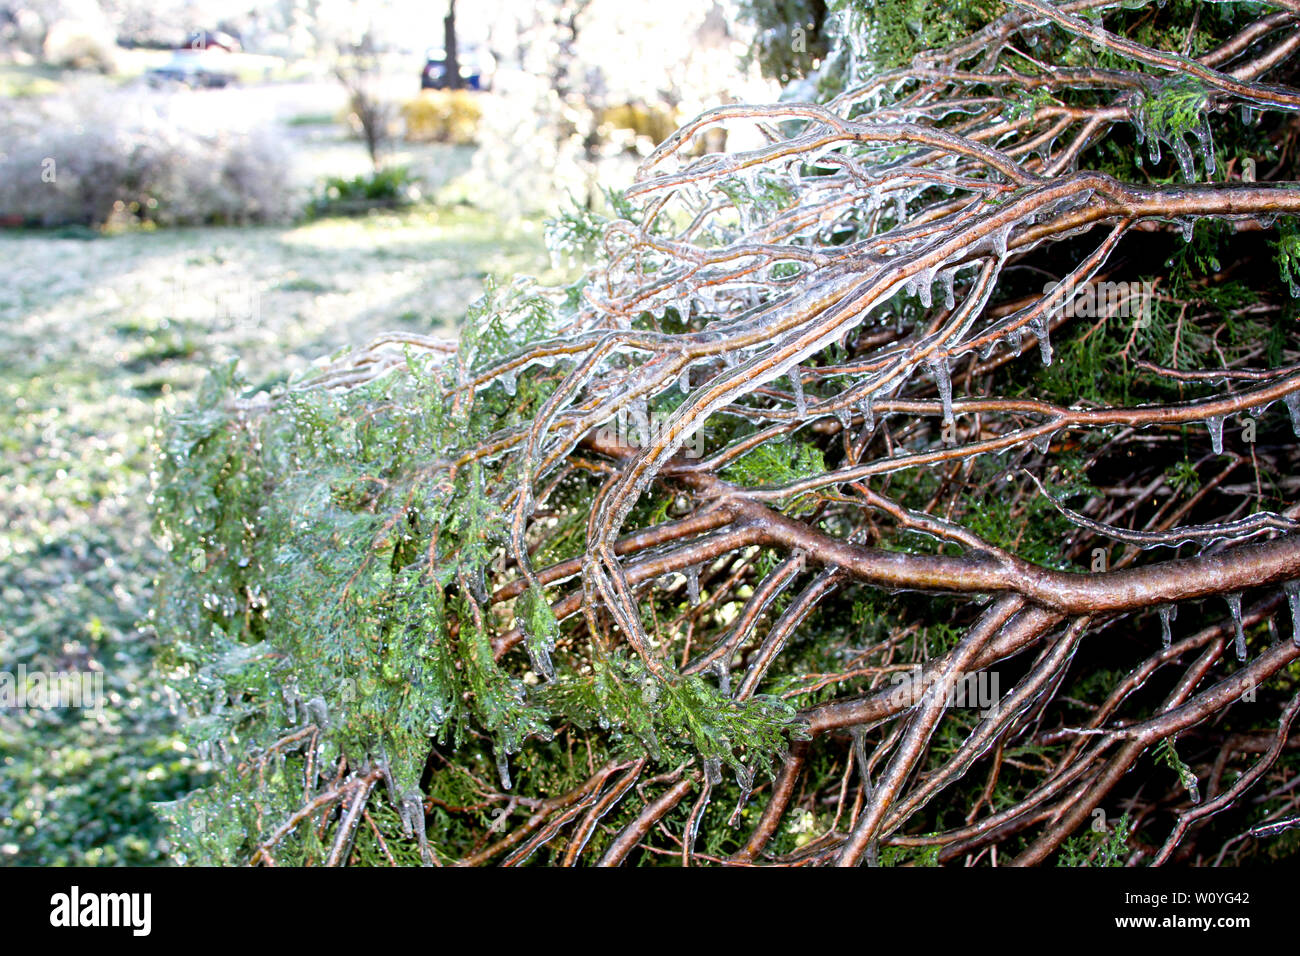 Newton, KS. 11th April, 2013 An unusual ice storm hits Kansas during the spring, covering emerging plant life with a sheet of ice. Stock Photo